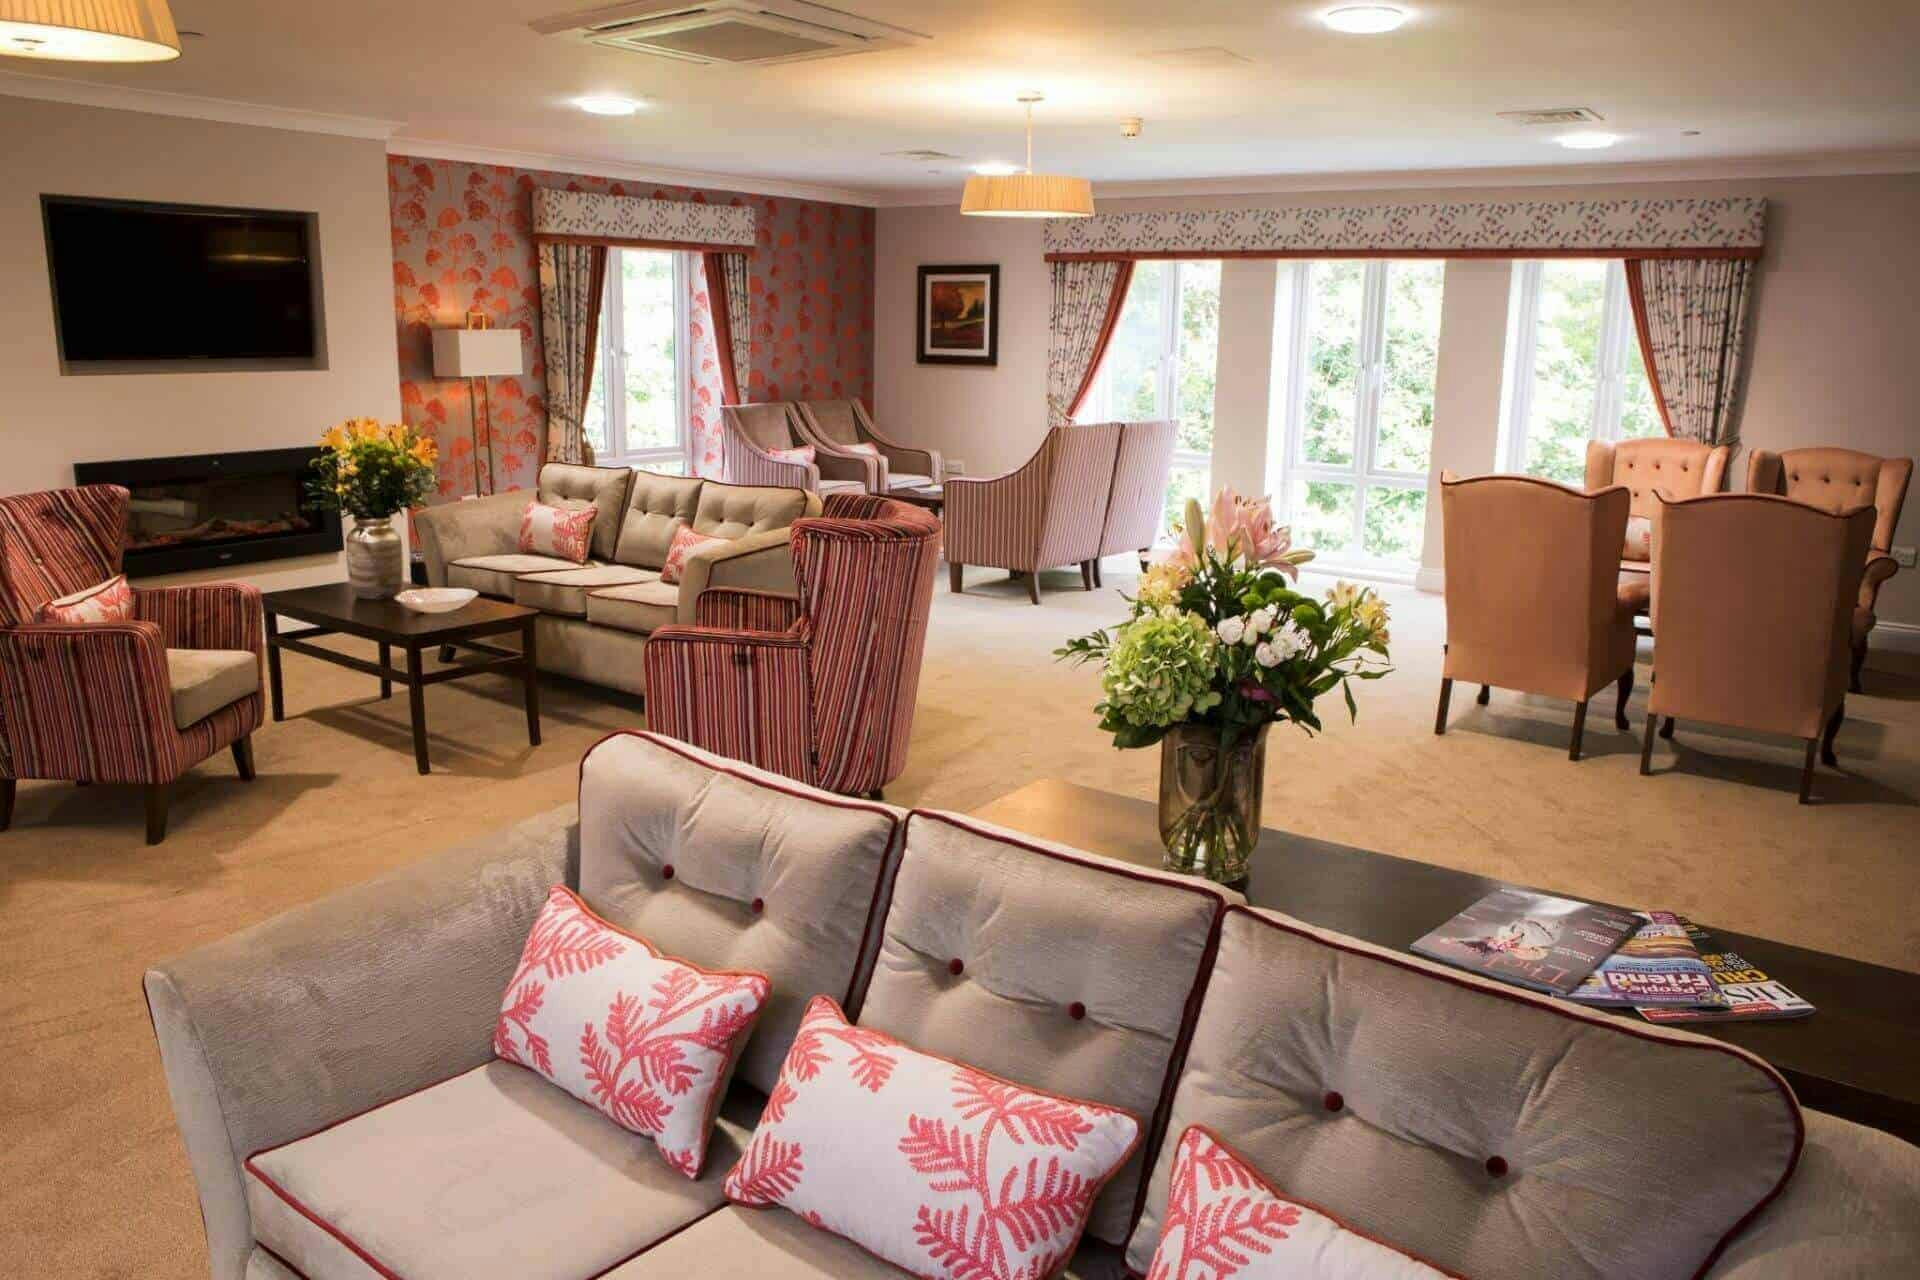 Rivermede Court care home